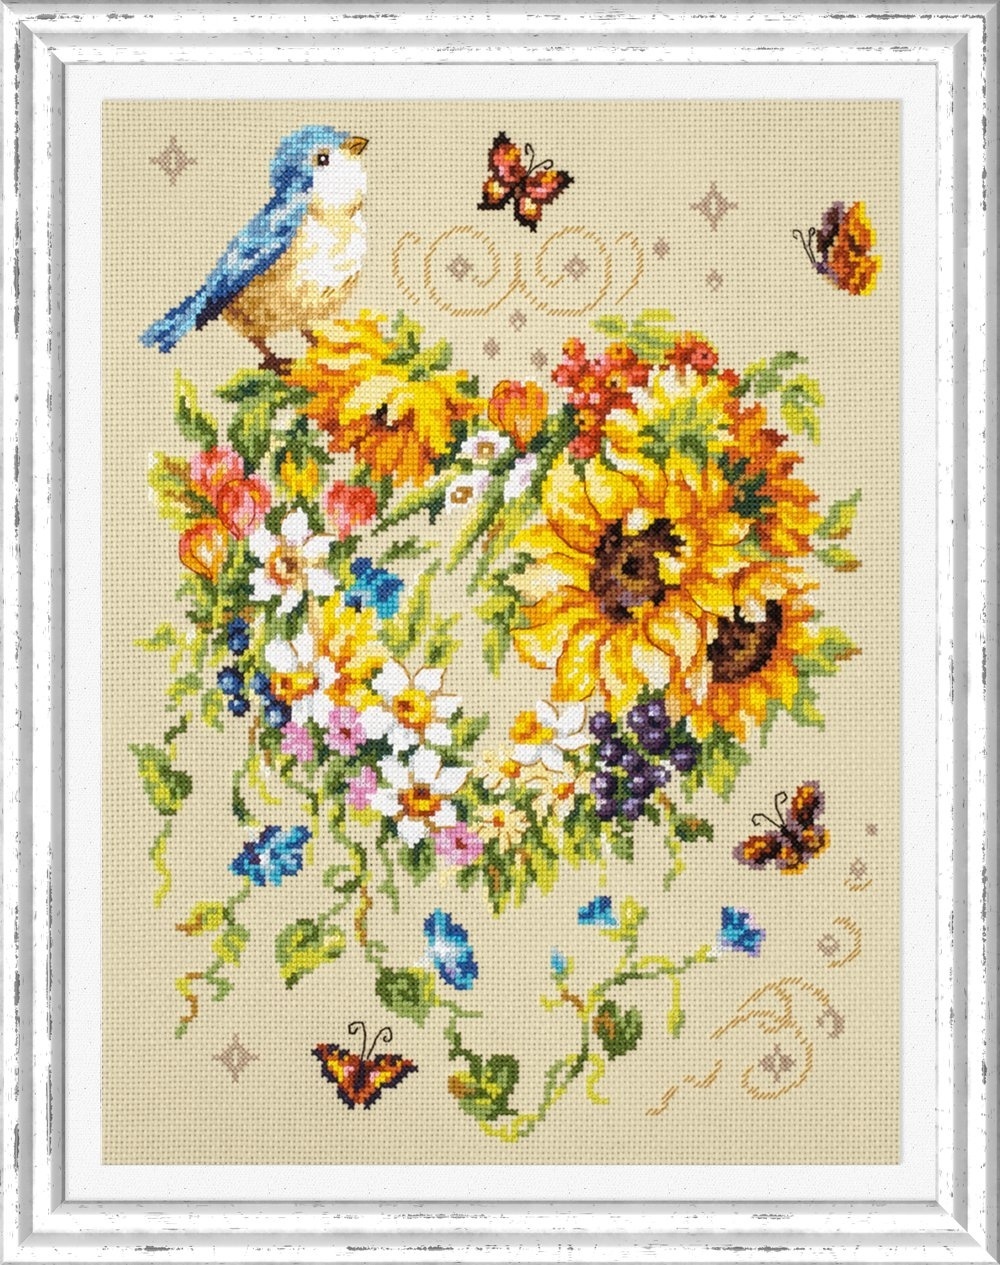 Blue Jay and Grapes Counted Cross Stitch Kit by Magic Needle